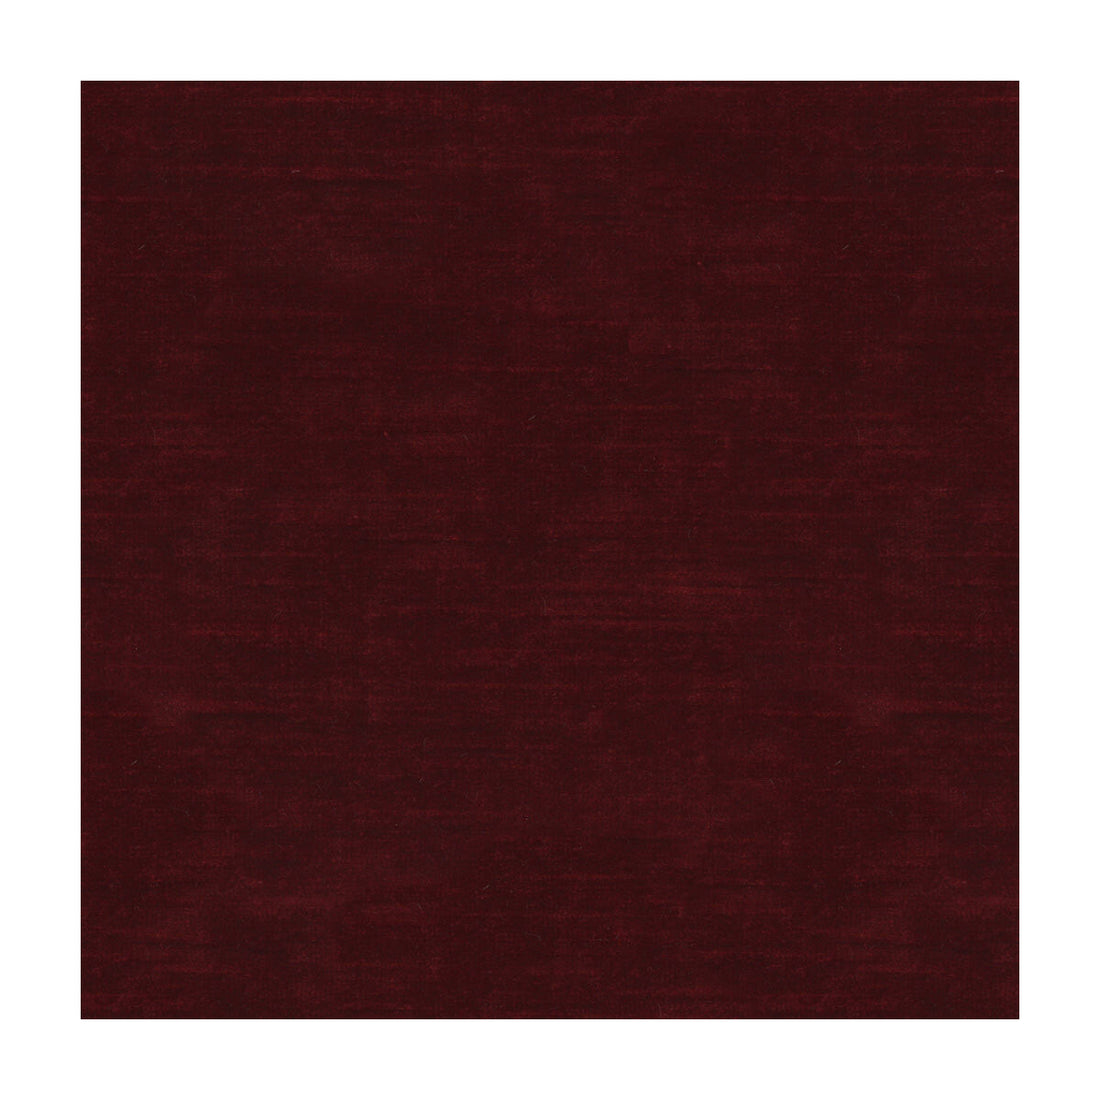 High Impact fabric in ruby color - pattern 34329.919.0 - by Kravet Couture